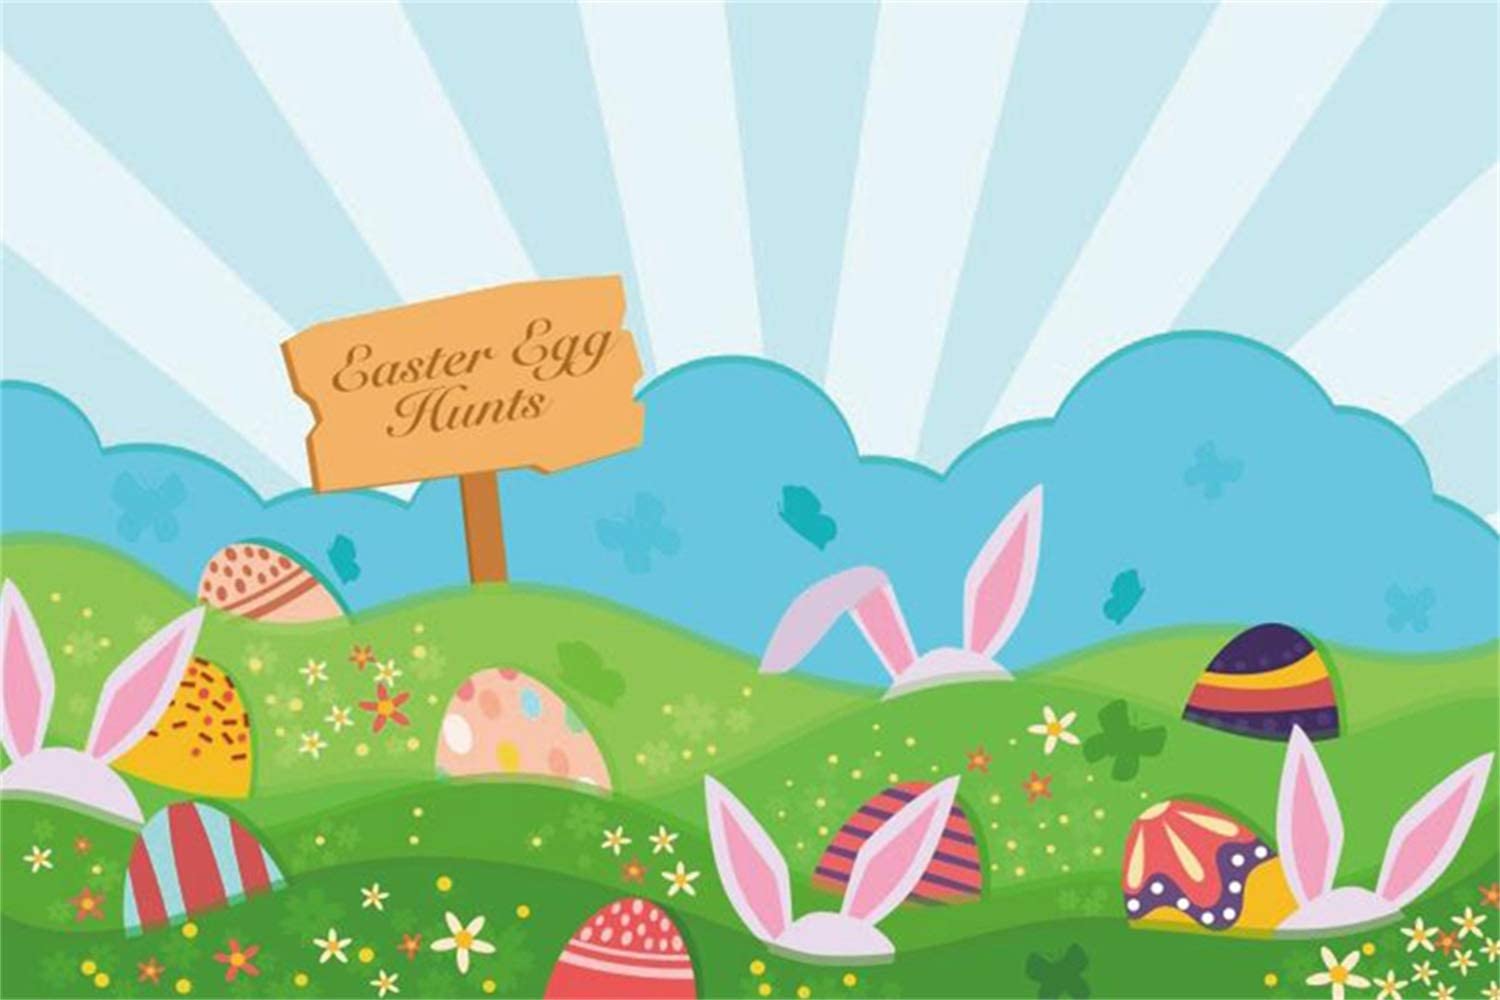 Amazon.com, Laeacco Vinyl 5x3ft Cartoon Easter Day Backdrops Easter Egg Hunts Wooden Sign Colorful Funny Easter Eggs Big Cute Bunny Ears Floral Grassland Radial Stripes Background Community Activities Banner